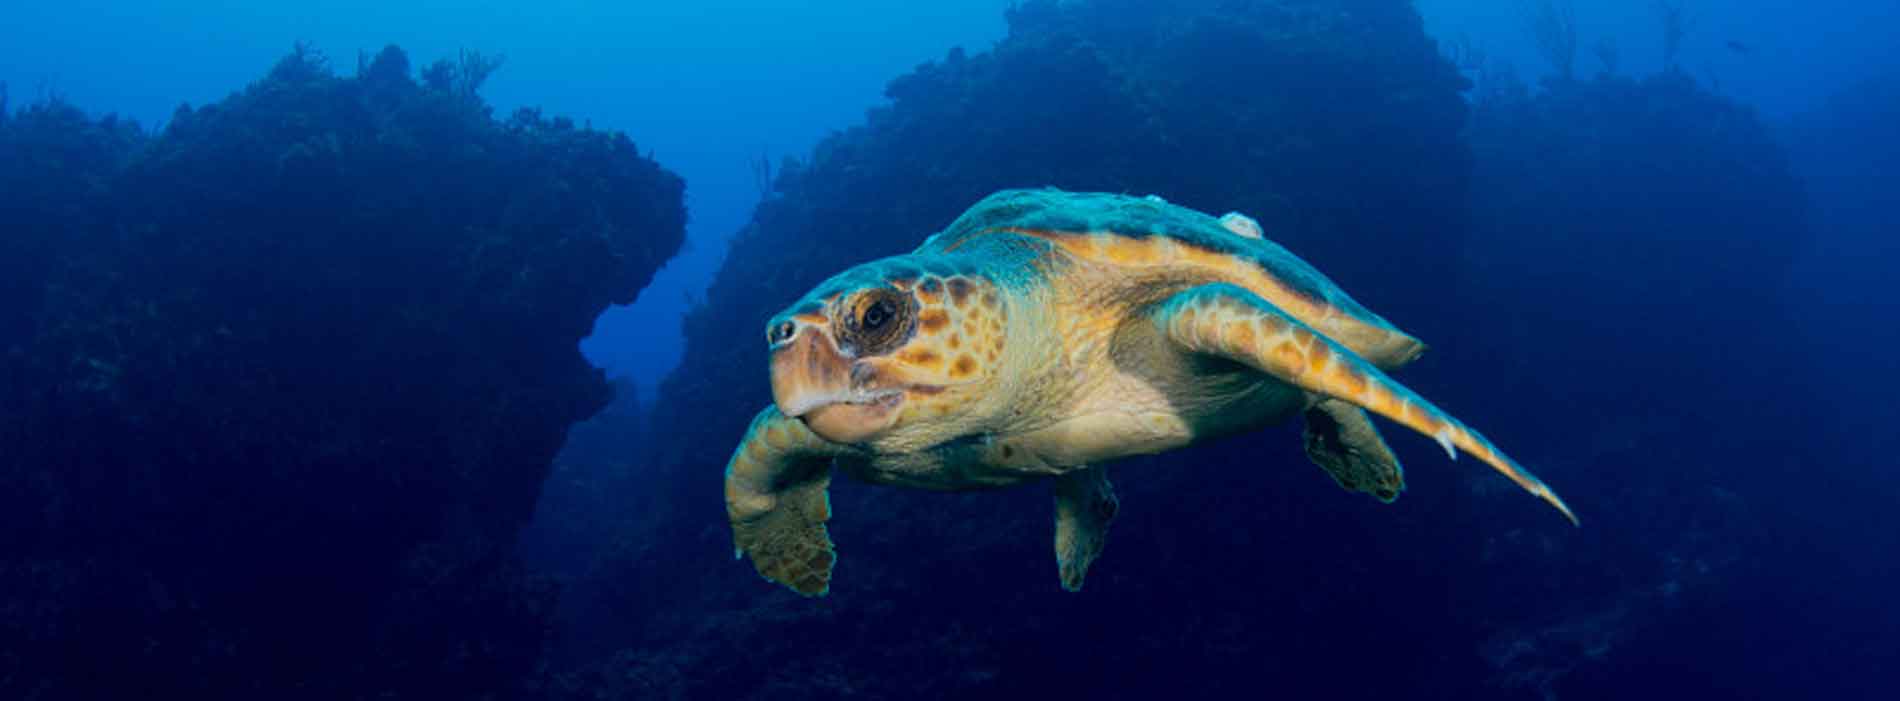 Sea turtle underwater in a coral reef